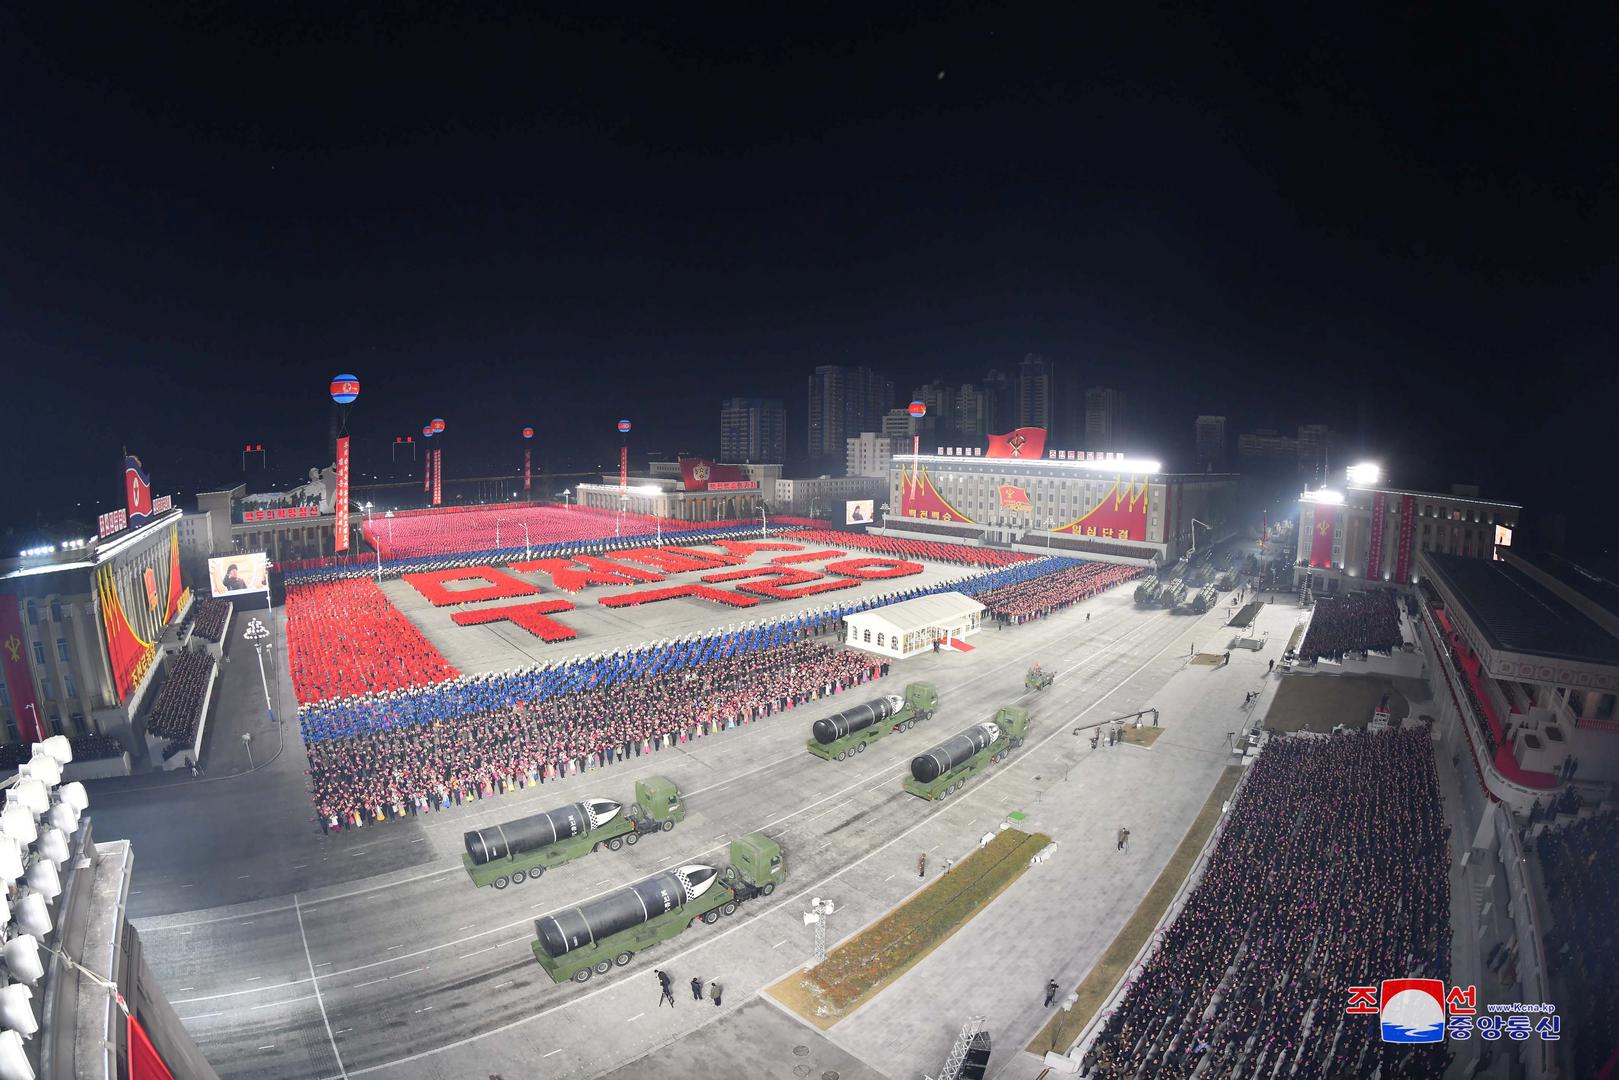 8th Congress of the Workers' Party in Pyongyang A general view of a military parade to commemorate the 8th Congress of the Workers' Party in Pyongyang, North Korea January 14, 2021 in this photo supplied by North Korea's Central News Agency (KCNA).    KCNA via REUTERS    ATTENTION EDITORS - THIS IMAGE WAS PROVIDED BY A THIRD PARTY. REUTERS IS UNABLE TO INDEPENDENTLY VERIFY THIS IMAGE. NO THIRD PARTY SALES. SOUTH KOREA OUT. NO COMMERCIAL OR EDITORIAL SALES IN SOUTH KOREA. KCNA